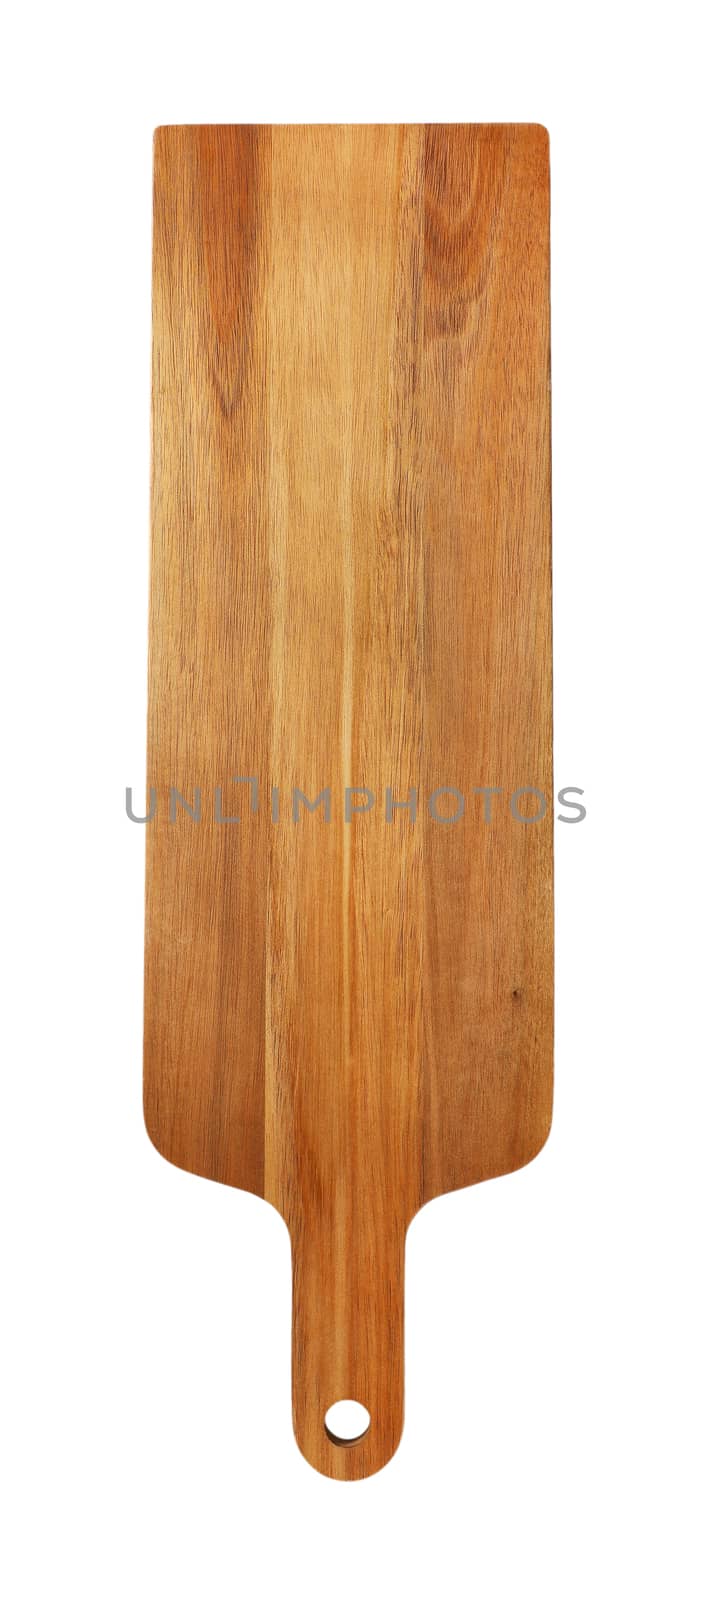 narrow wooden cutting board with handle on white background